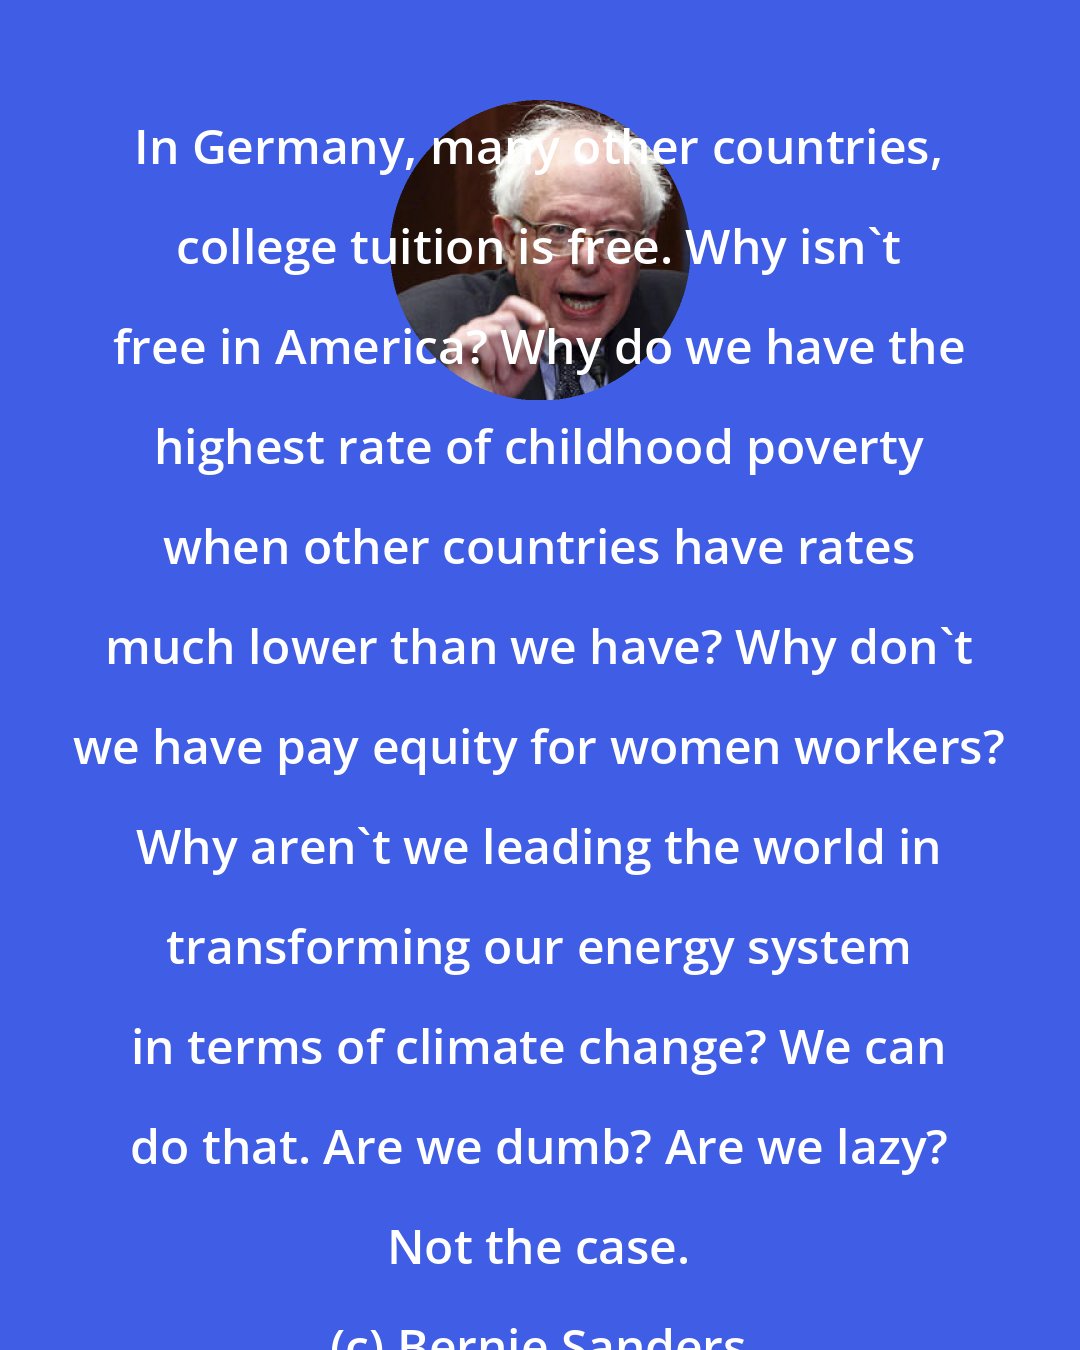 Bernie Sanders: In Germany, many other countries, college tuition is free. Why isn`t free in America? Why do we have the highest rate of childhood poverty when other countries have rates much lower than we have? Why don`t we have pay equity for women workers? Why aren`t we leading the world in transforming our energy system in terms of climate change? We can do that. Are we dumb? Are we lazy? Not the case.